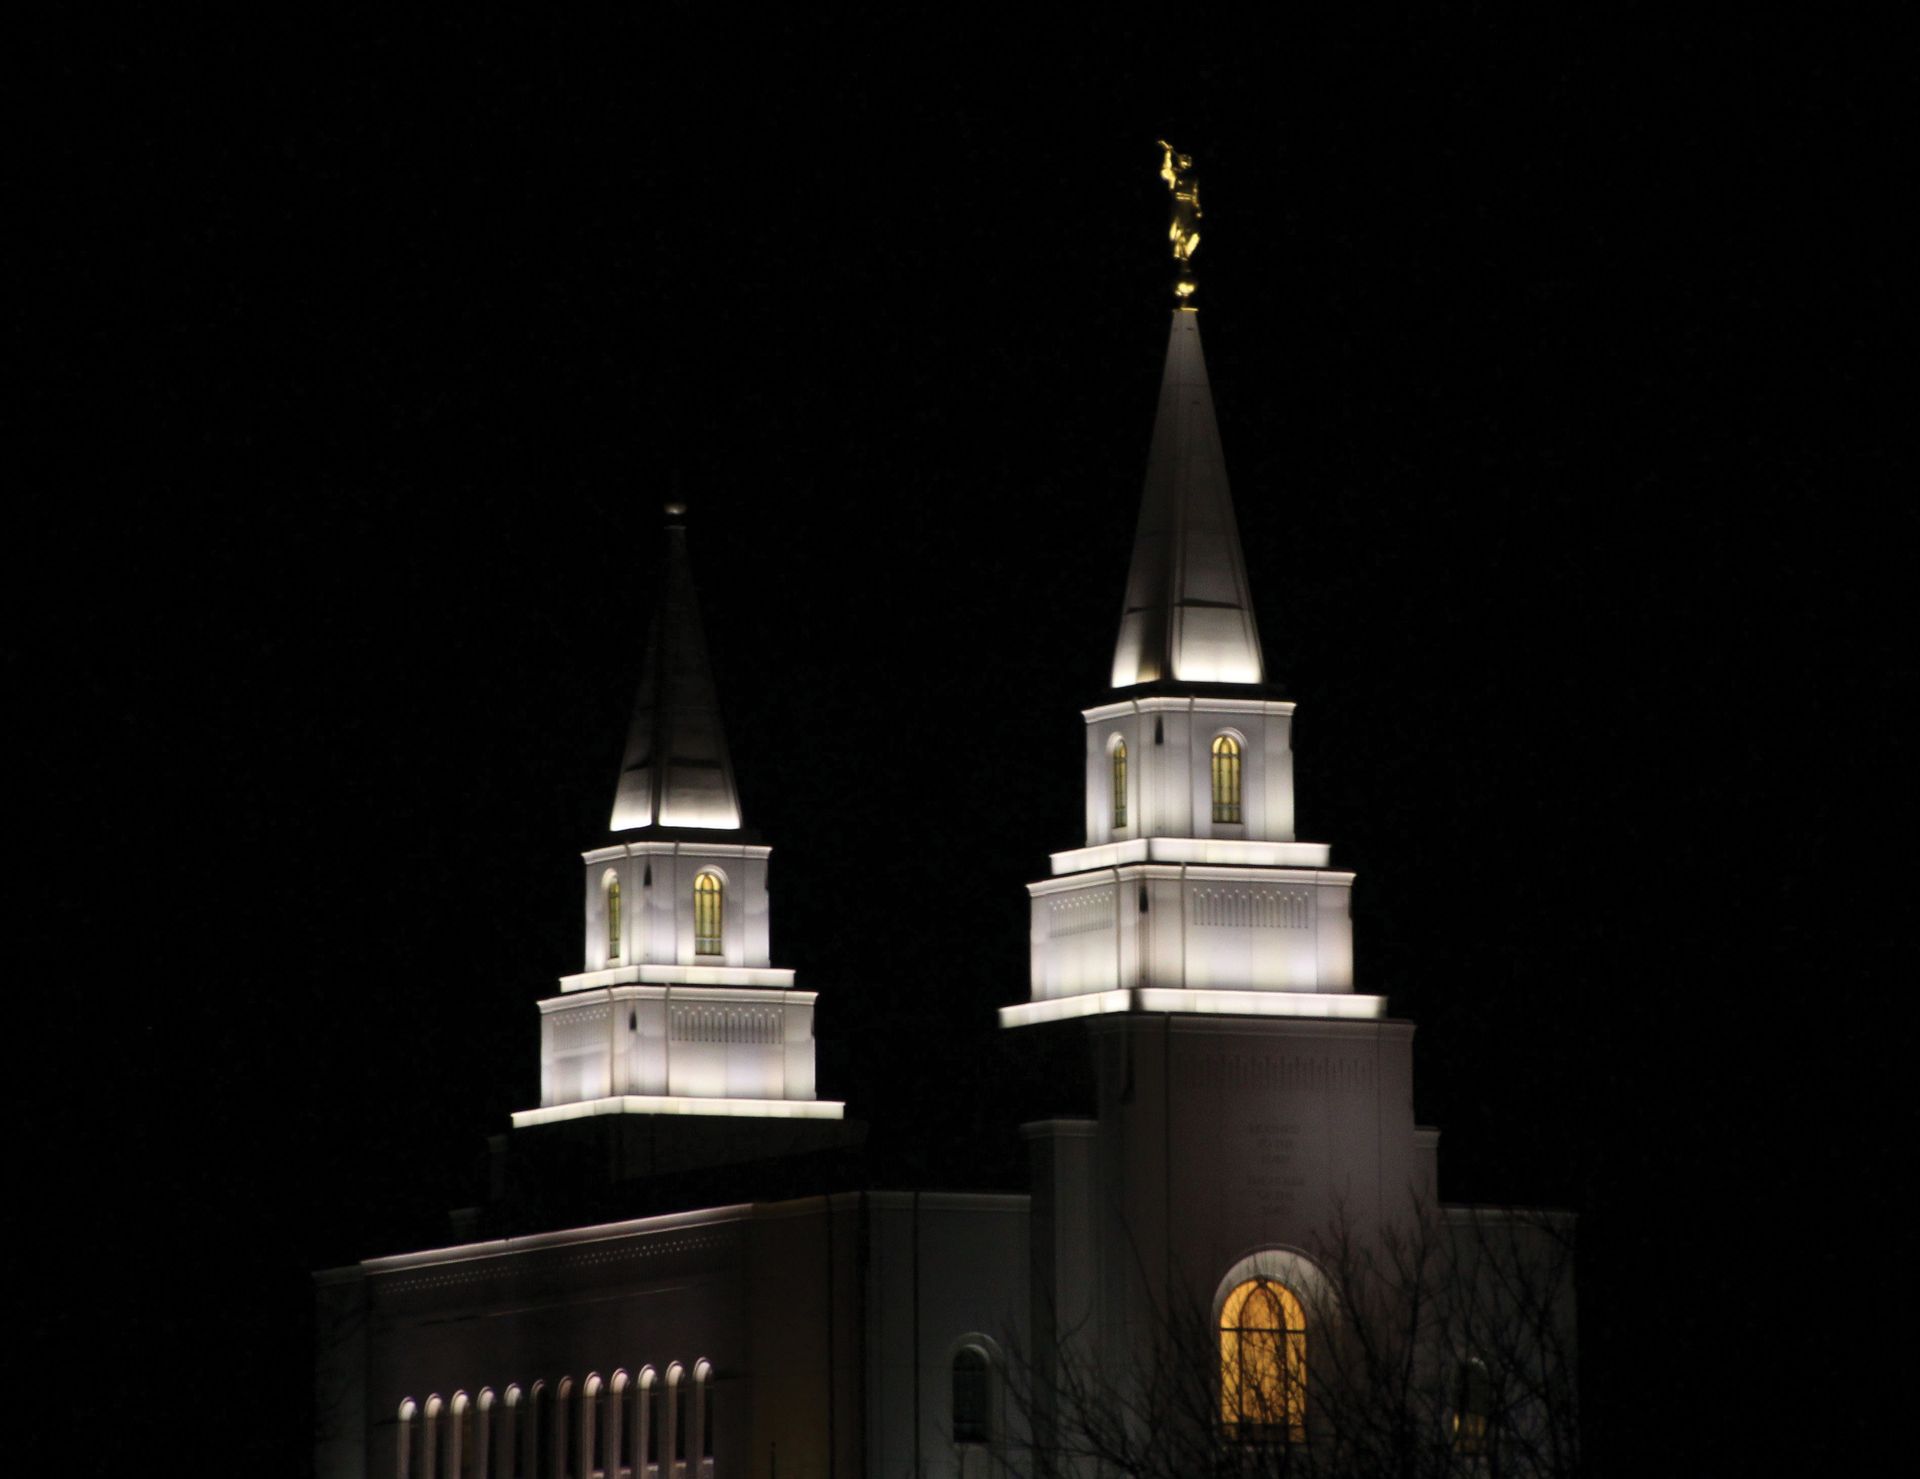 The Kansas City Missouri Temple lit up at night, including spires and windows.